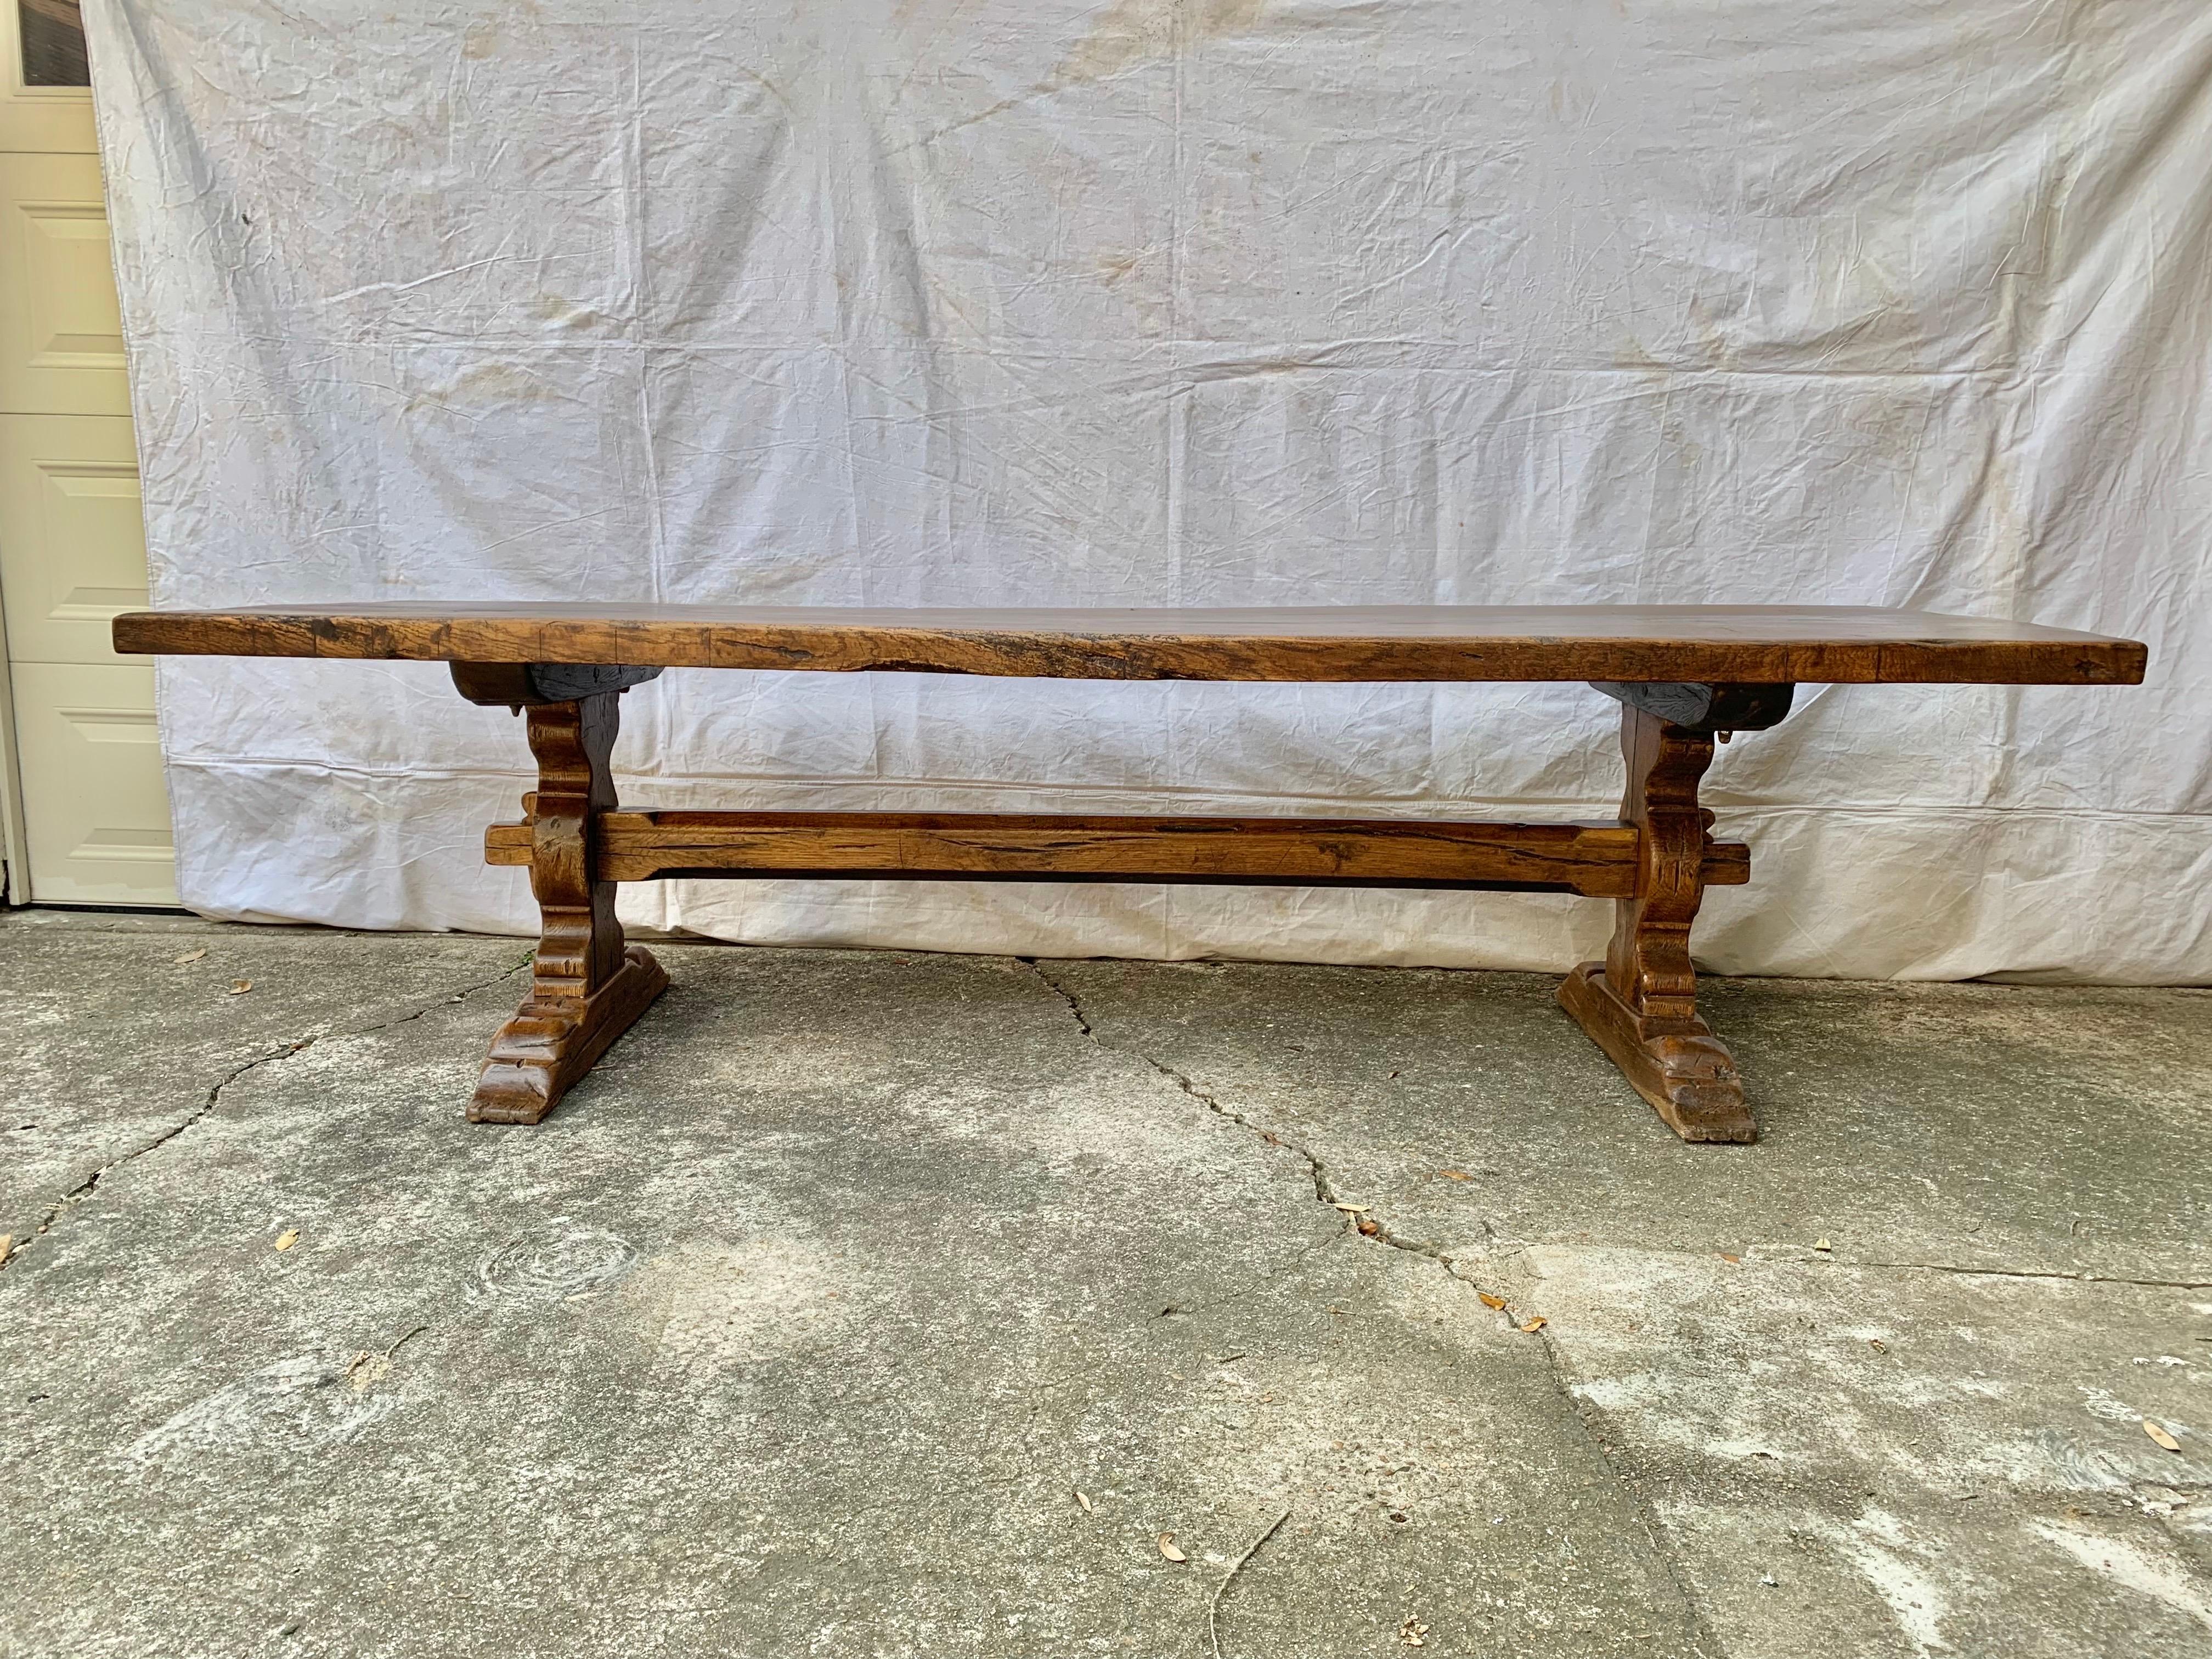 Found in the South of France this Mid 1800s French Walnut Monastery Table features a single plank 2